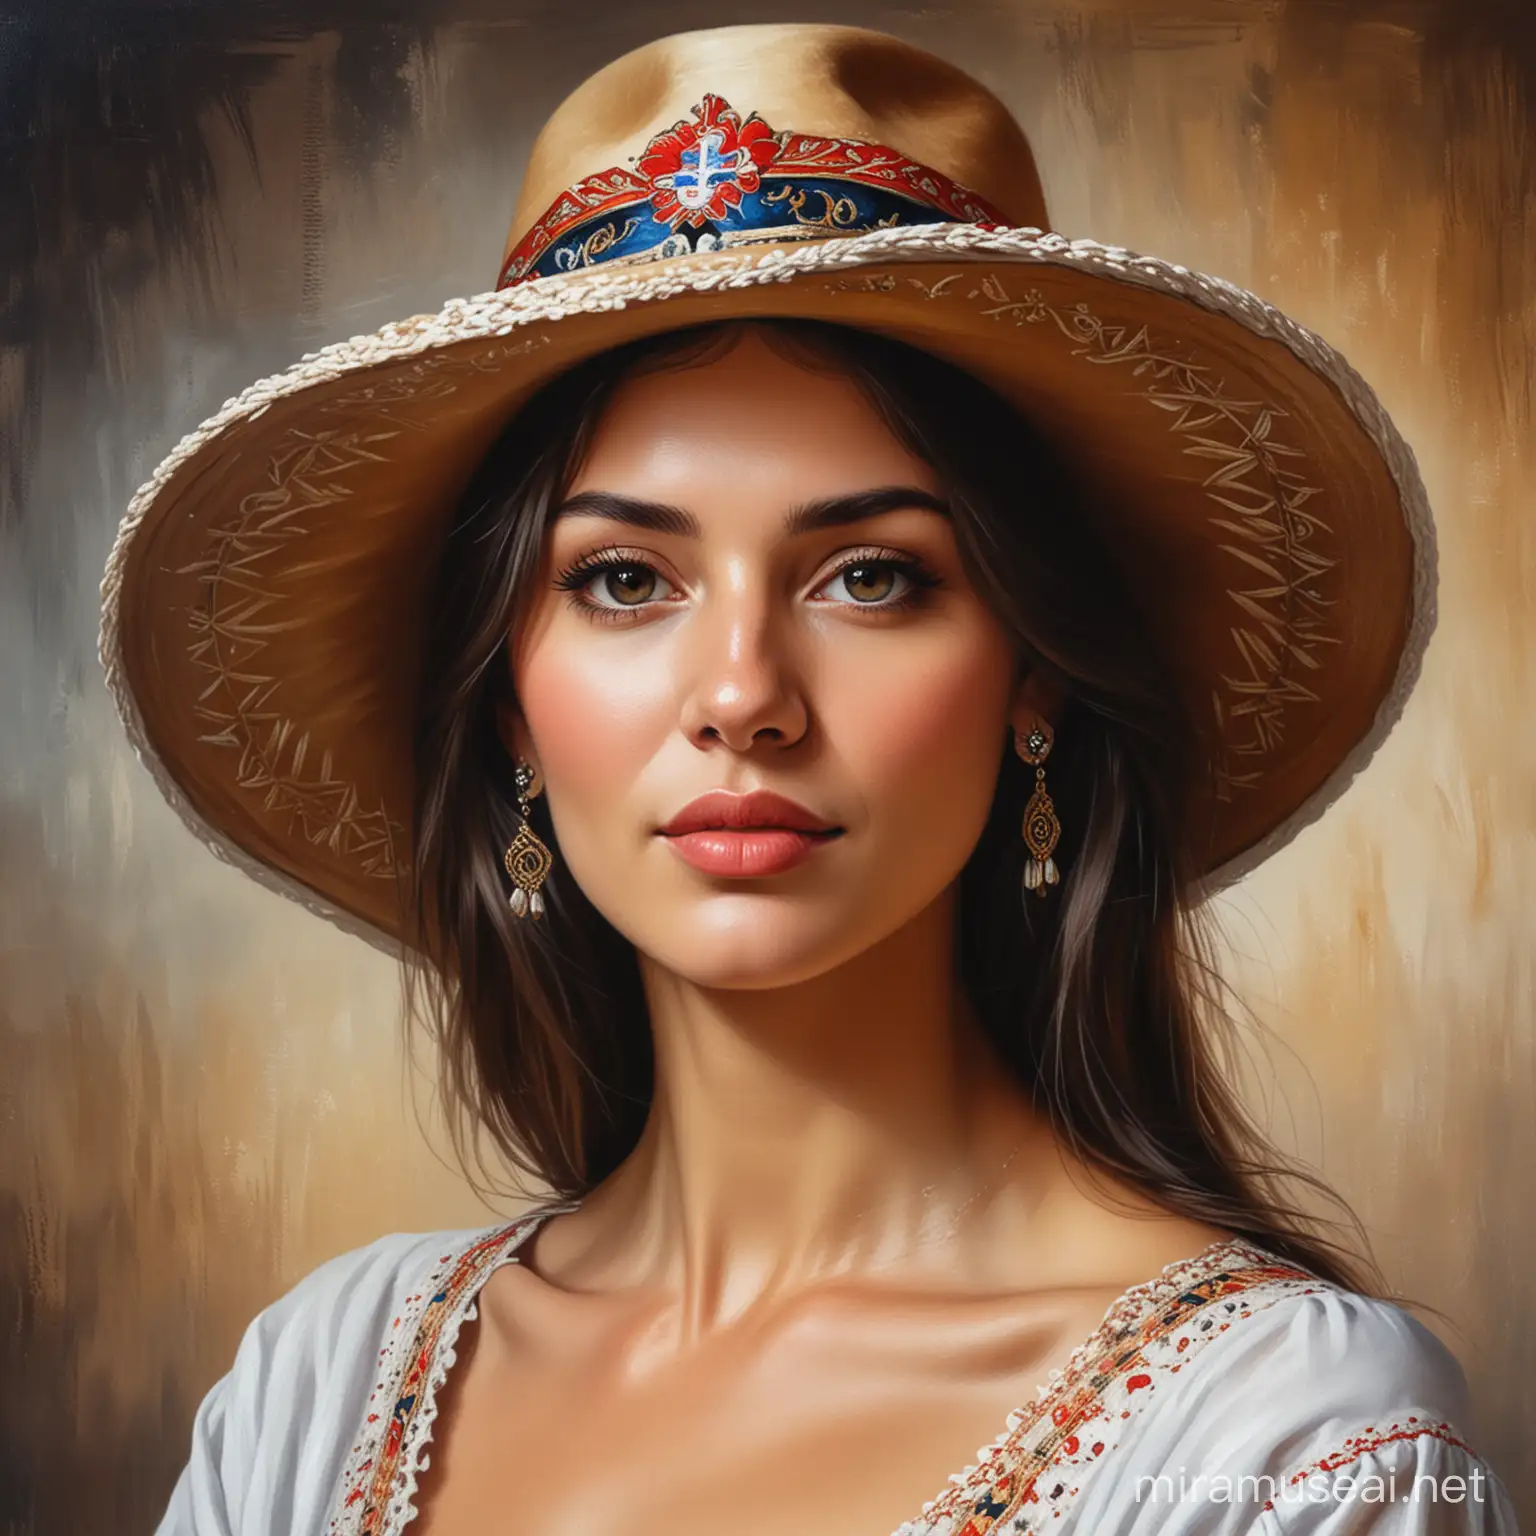 Beautiful Serbian woman portrait painting in a tradition hat